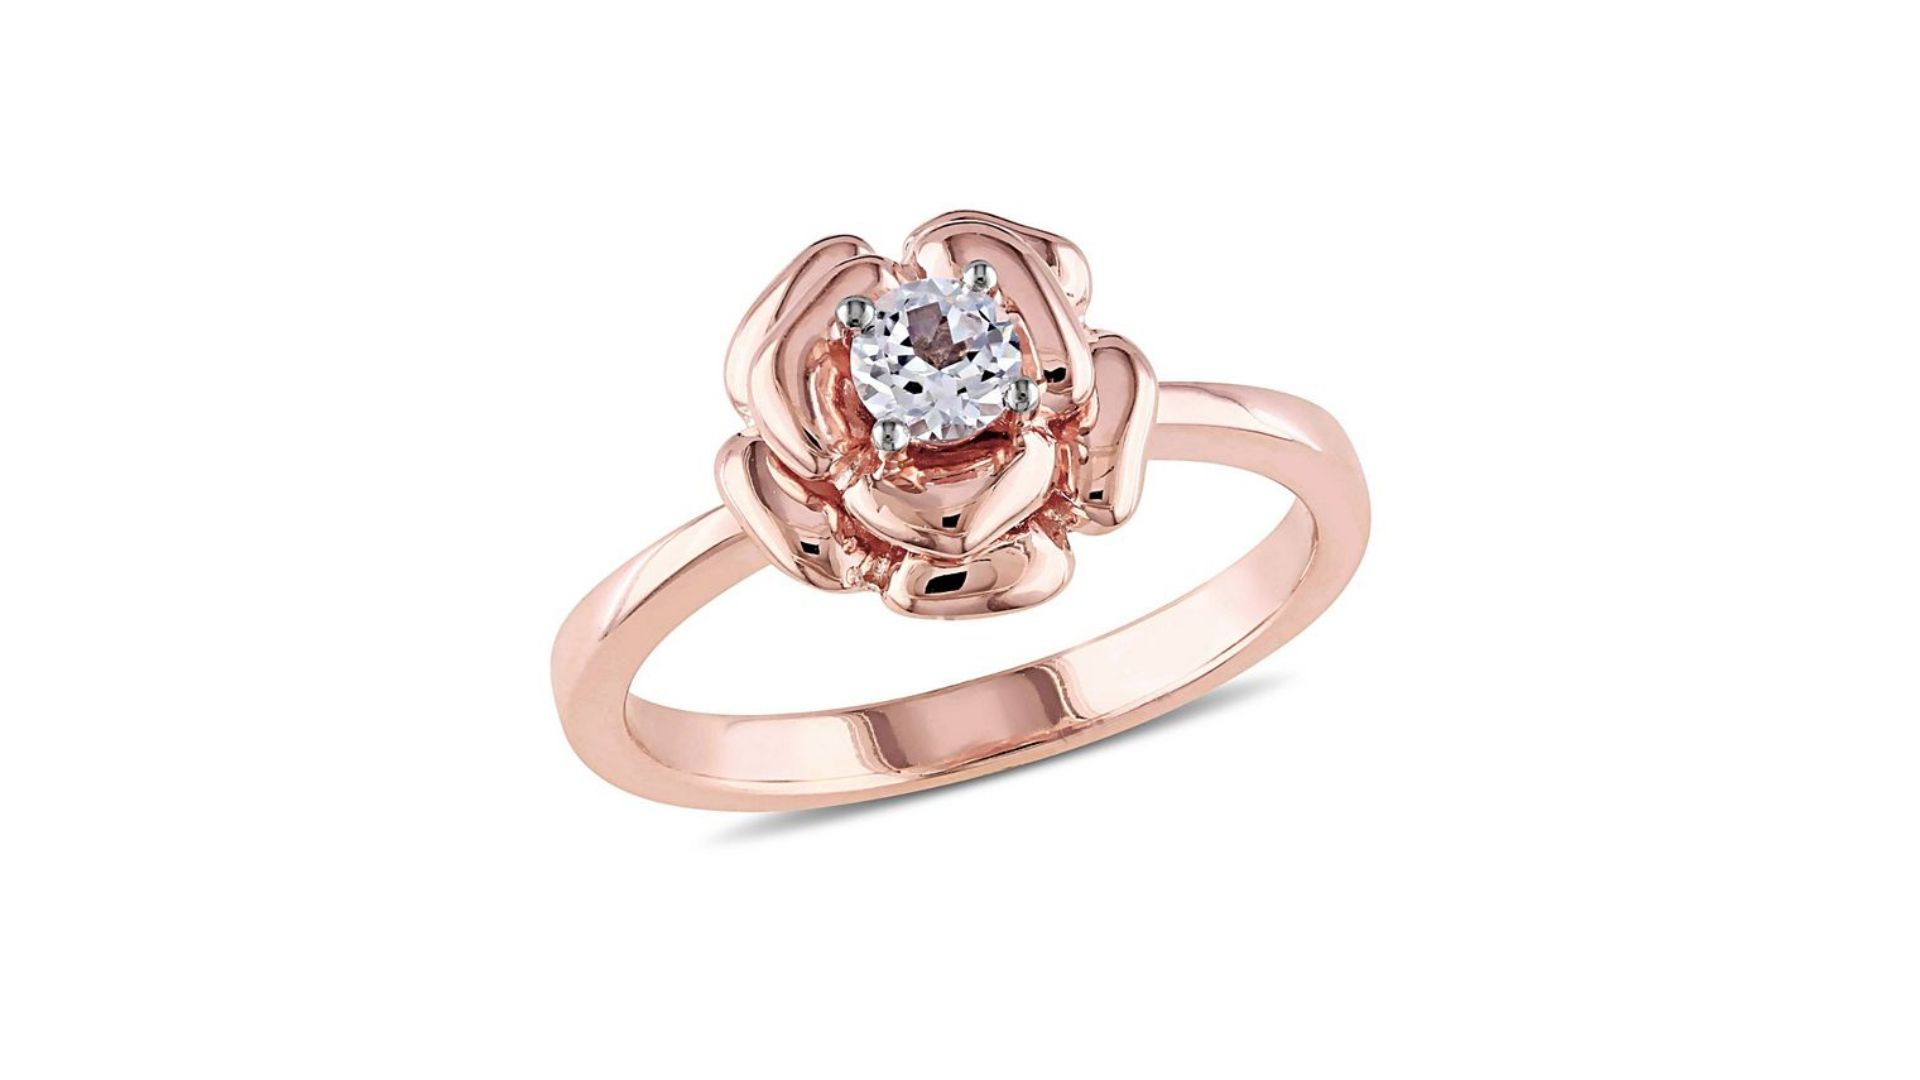 A Ring With A Flower On Its Top